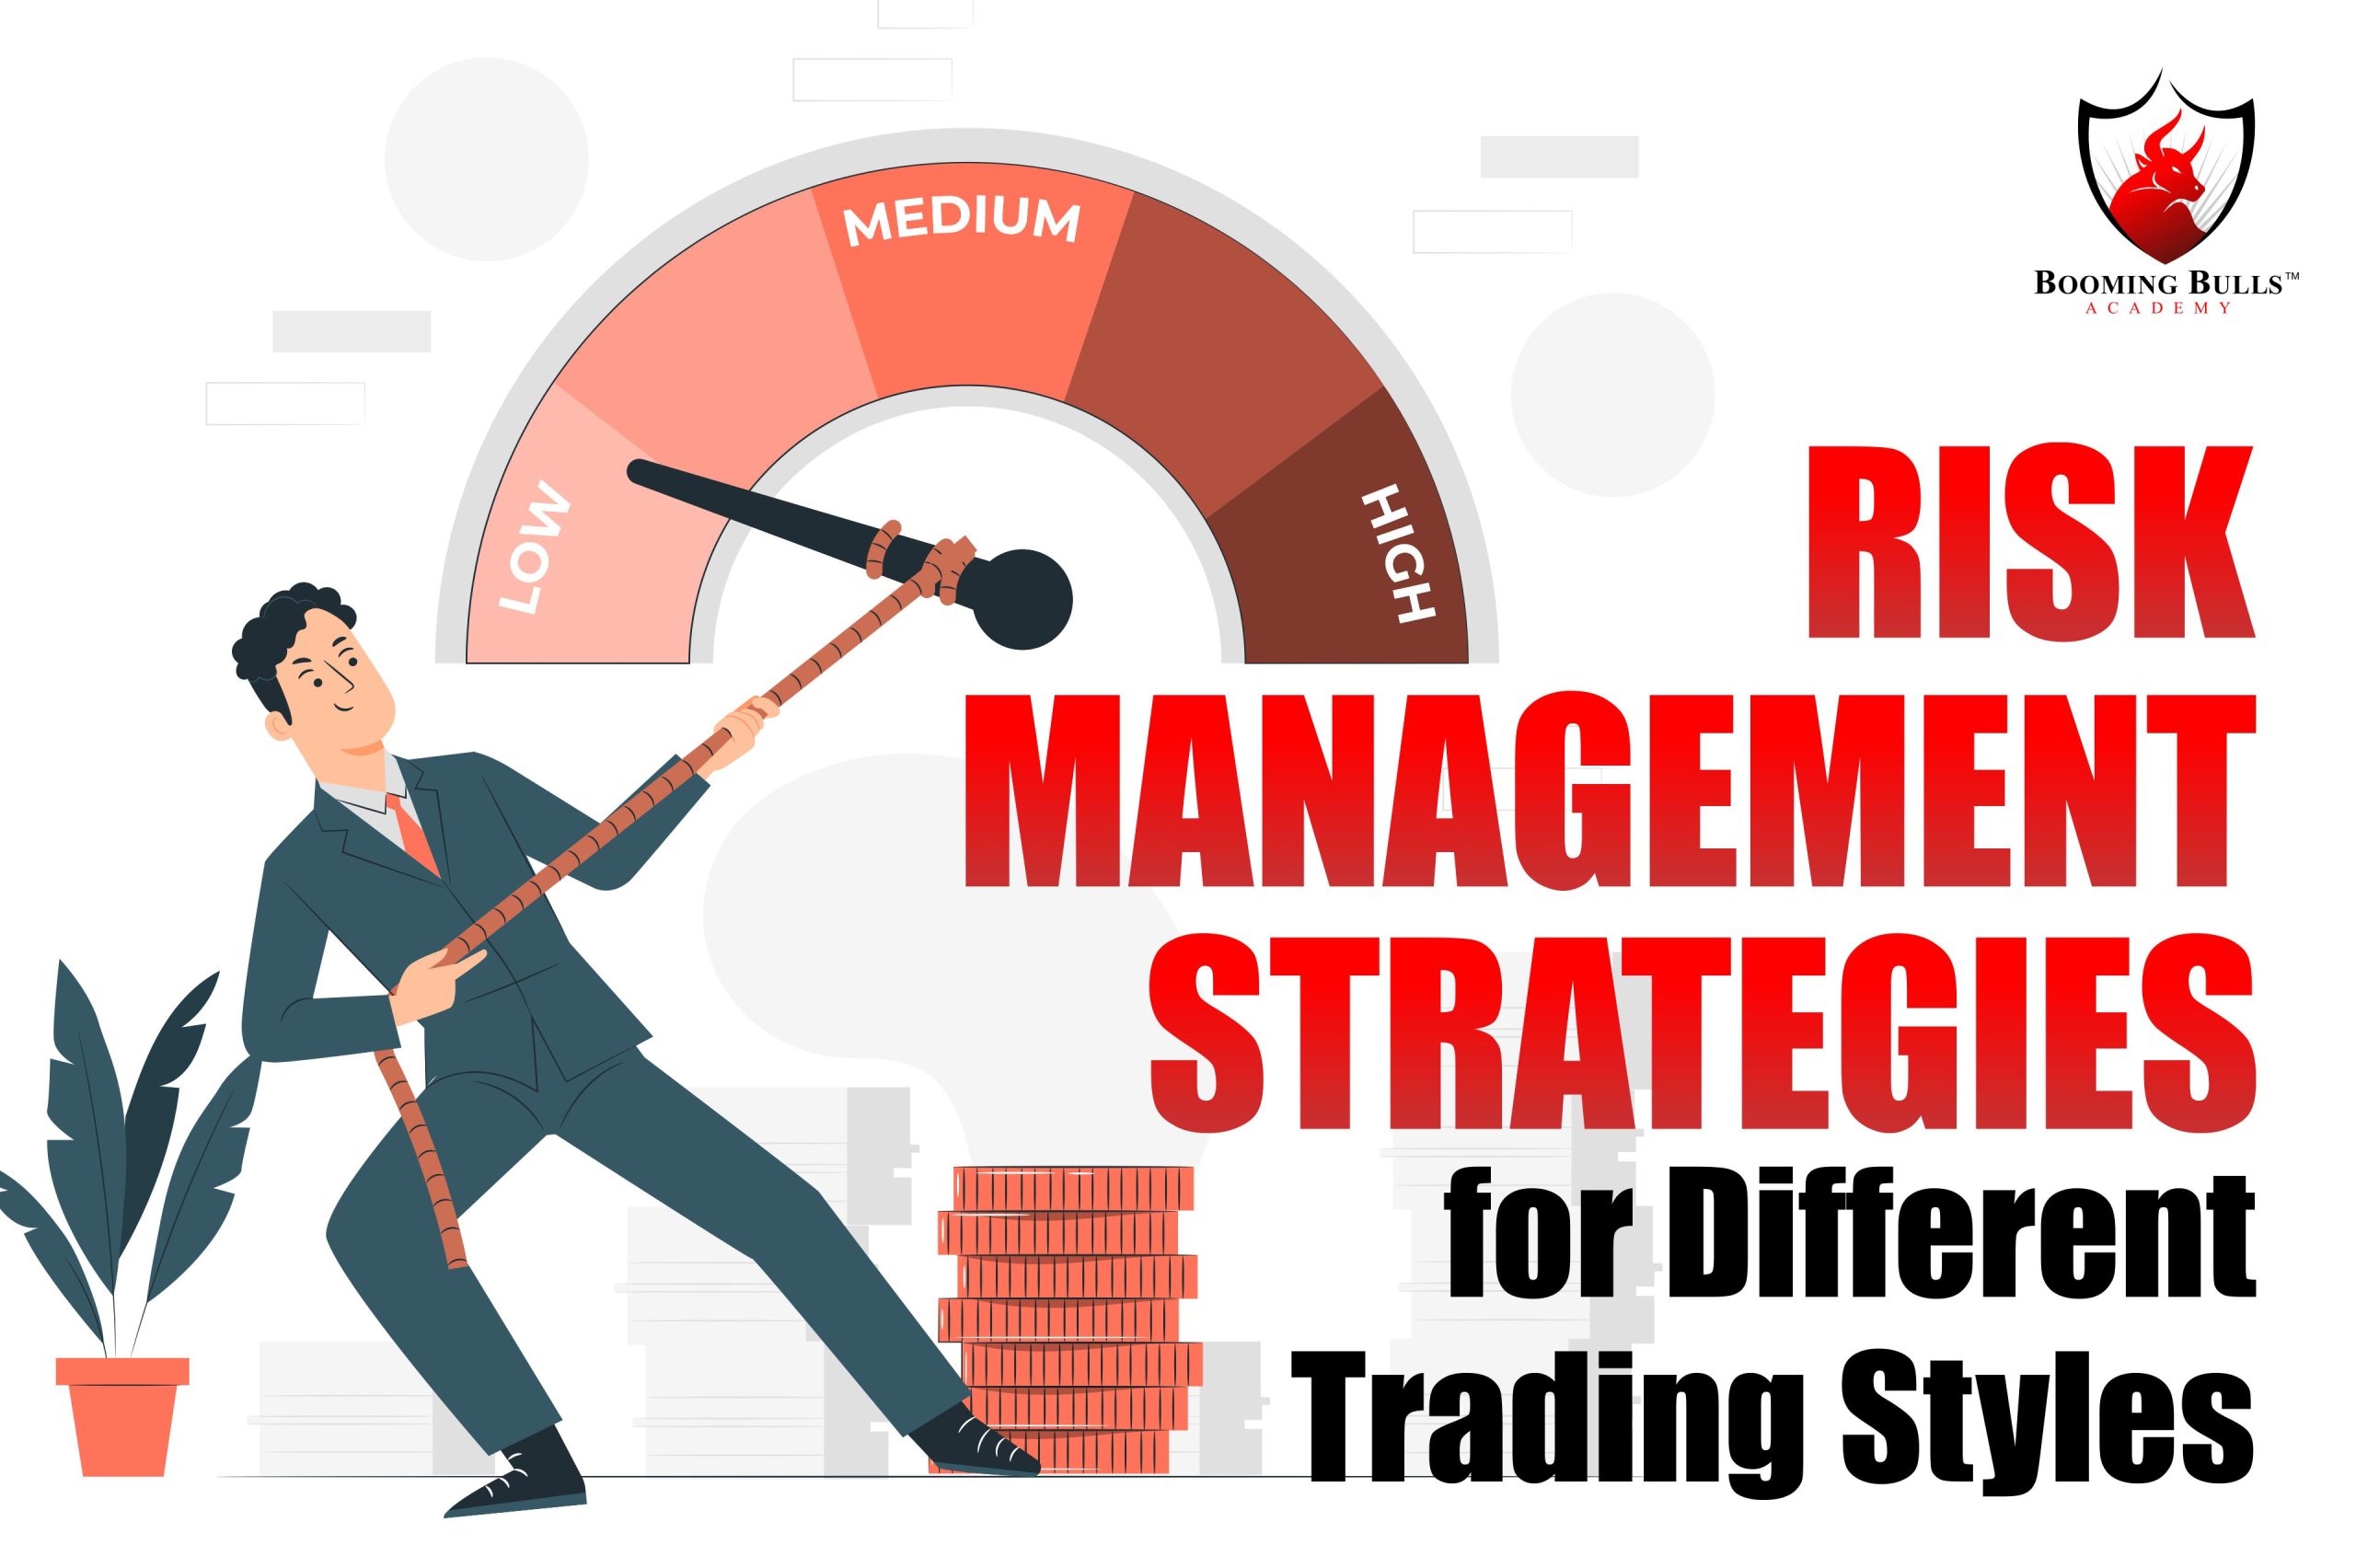 Risk Management Strategies for Different Trading Styles